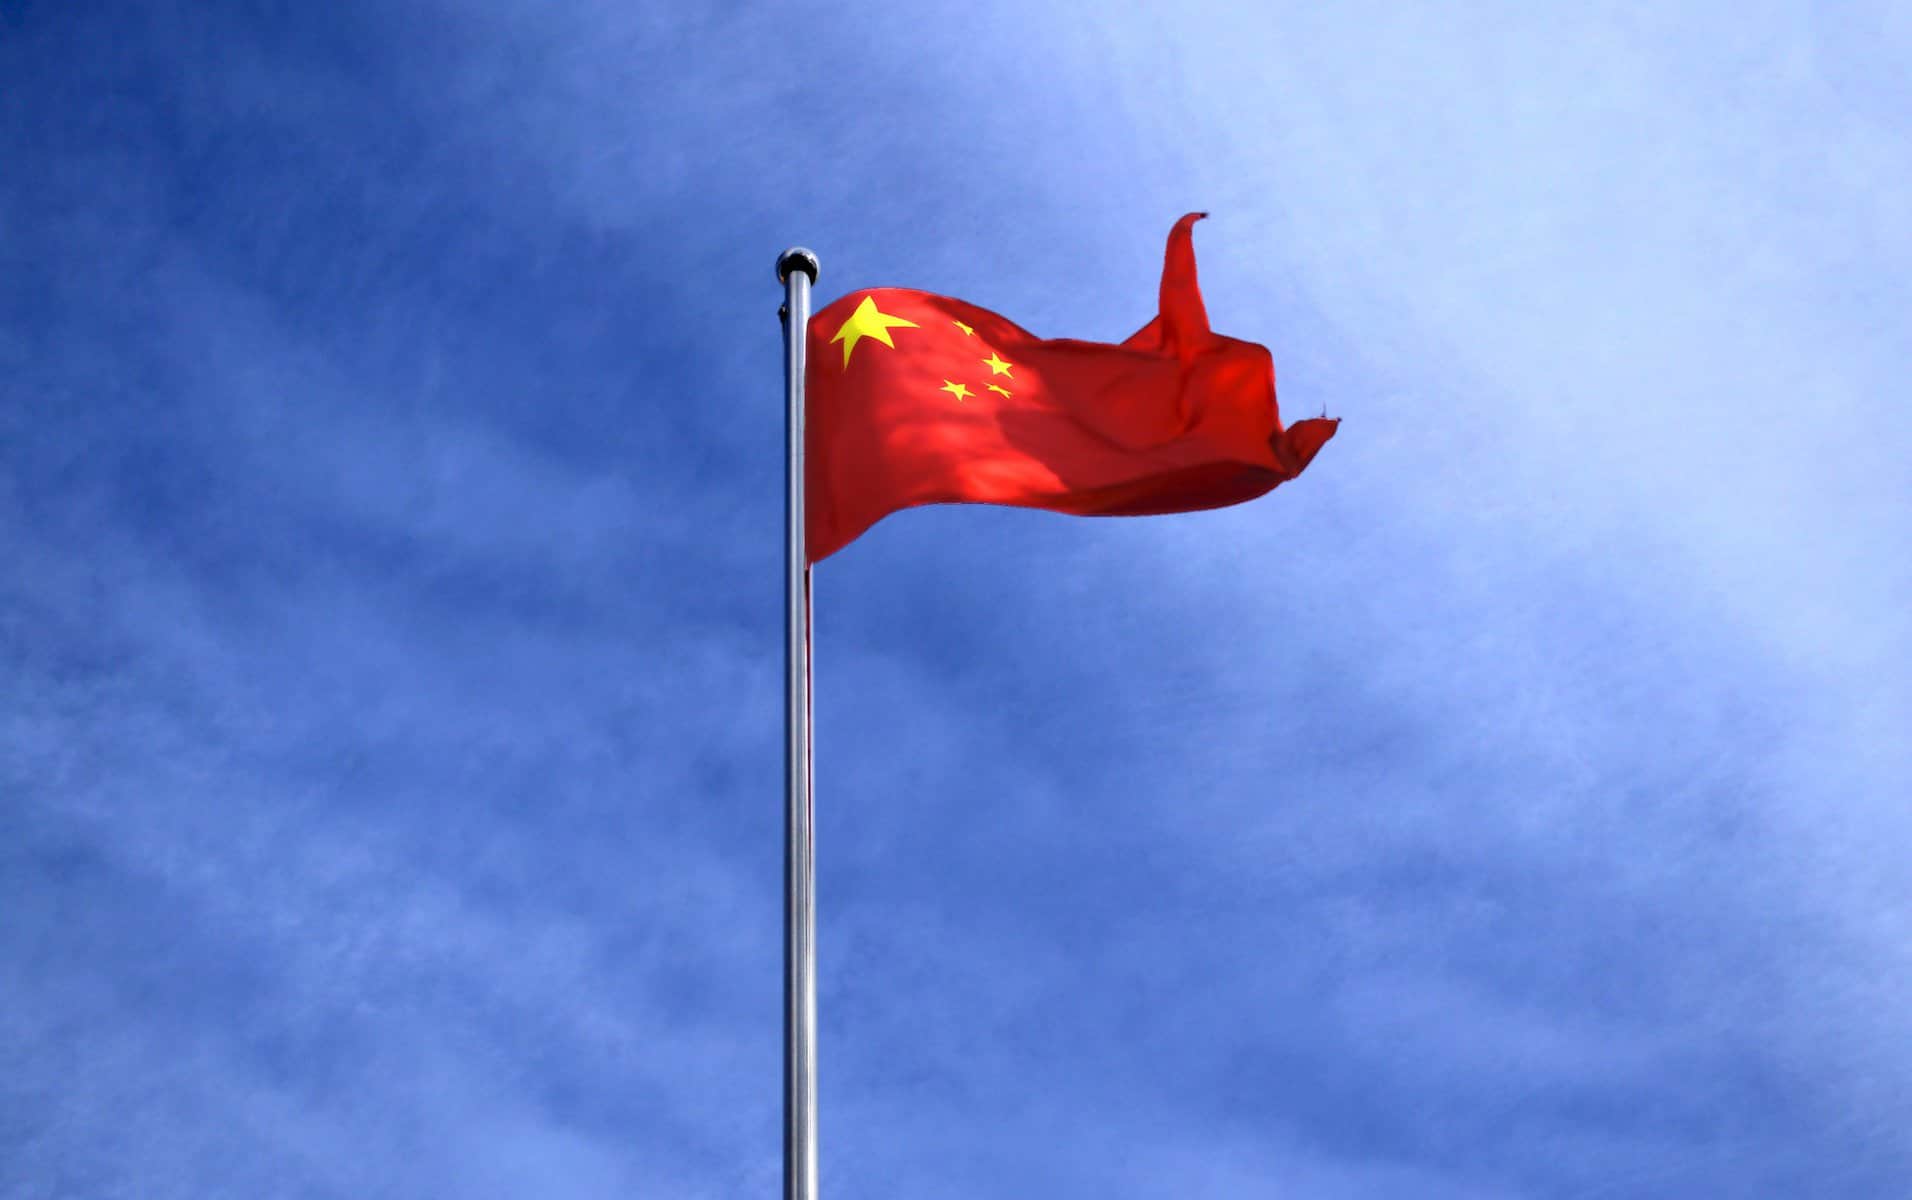 The flag of China waves in the breeze atop a flagpole against a blue sky.